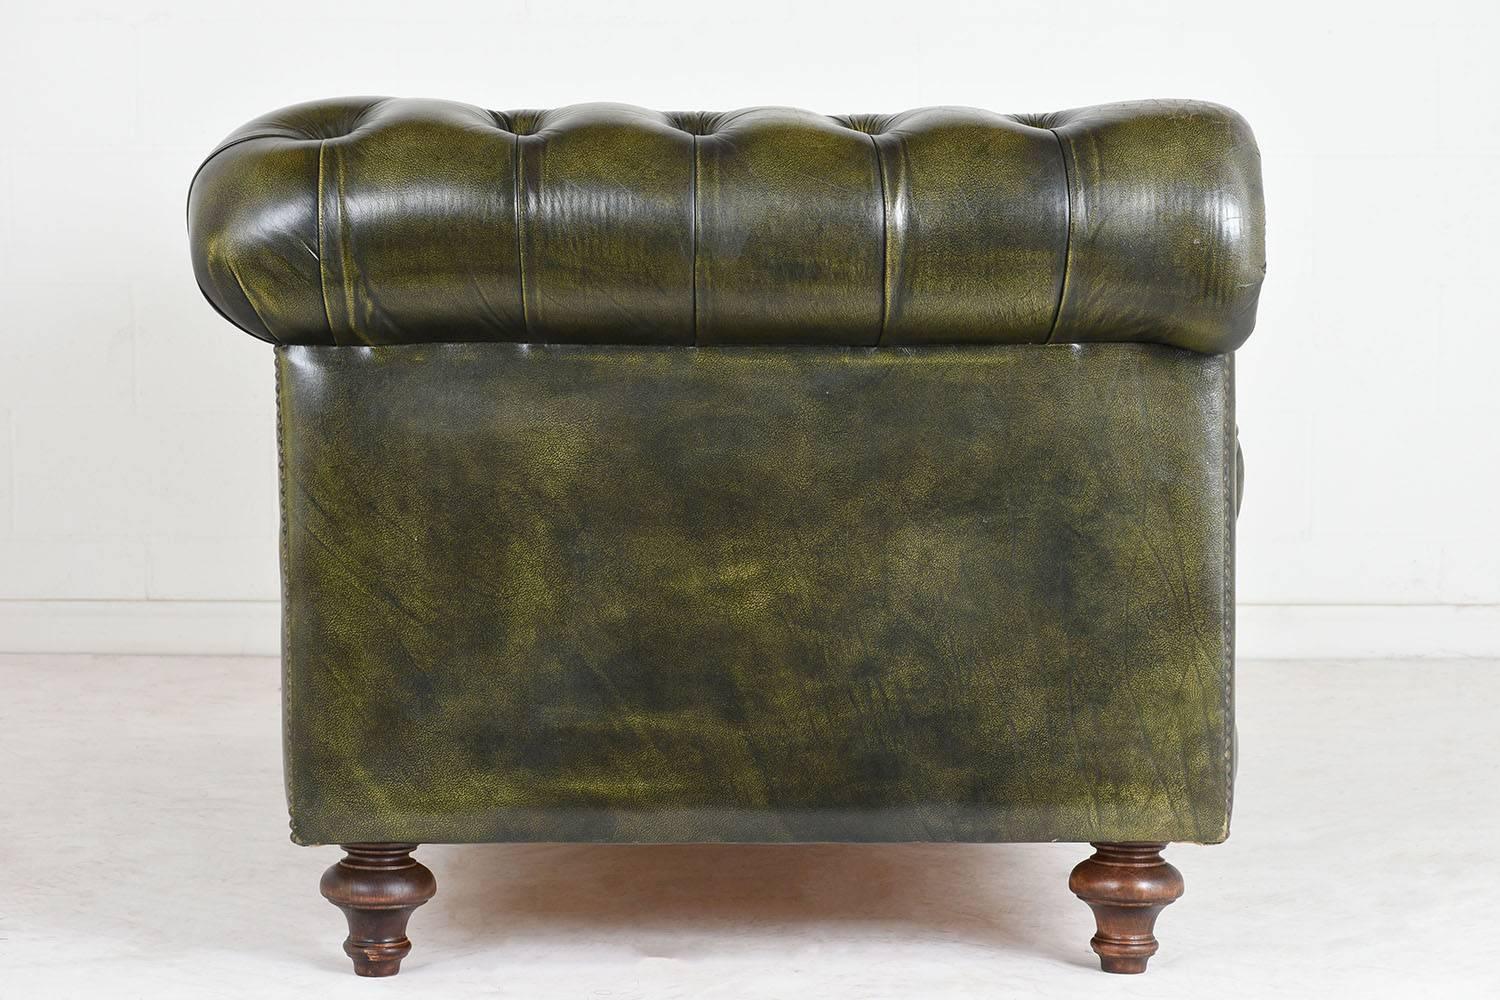 20th Century Vintage Chesterfield-Style Sofa